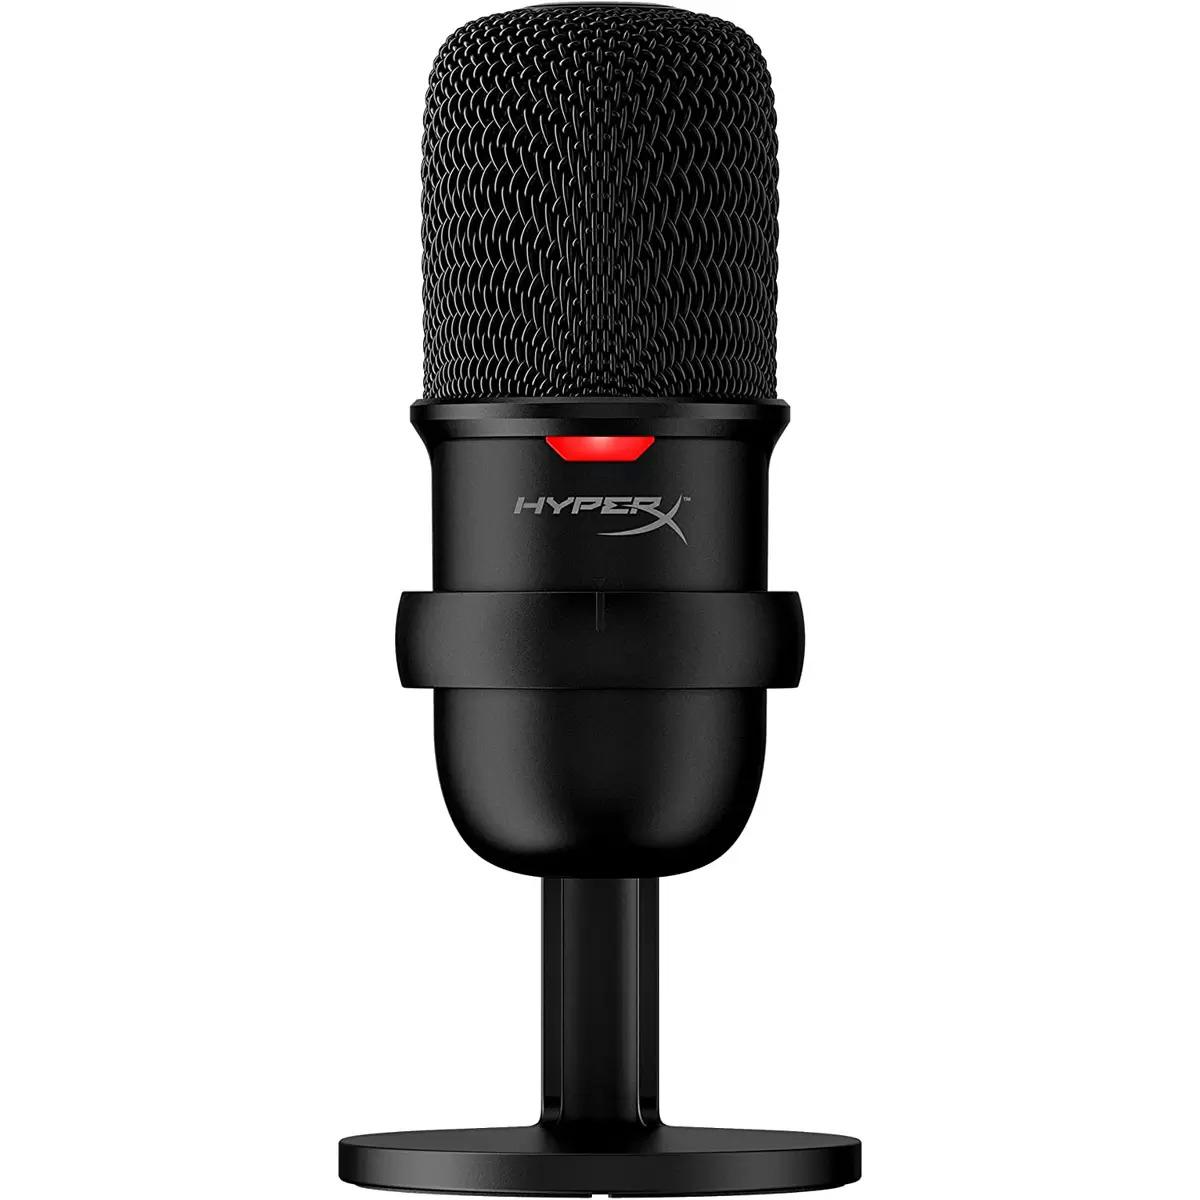 HyperX SoloCast USB Microphone with Stand for $26.54 Shipped